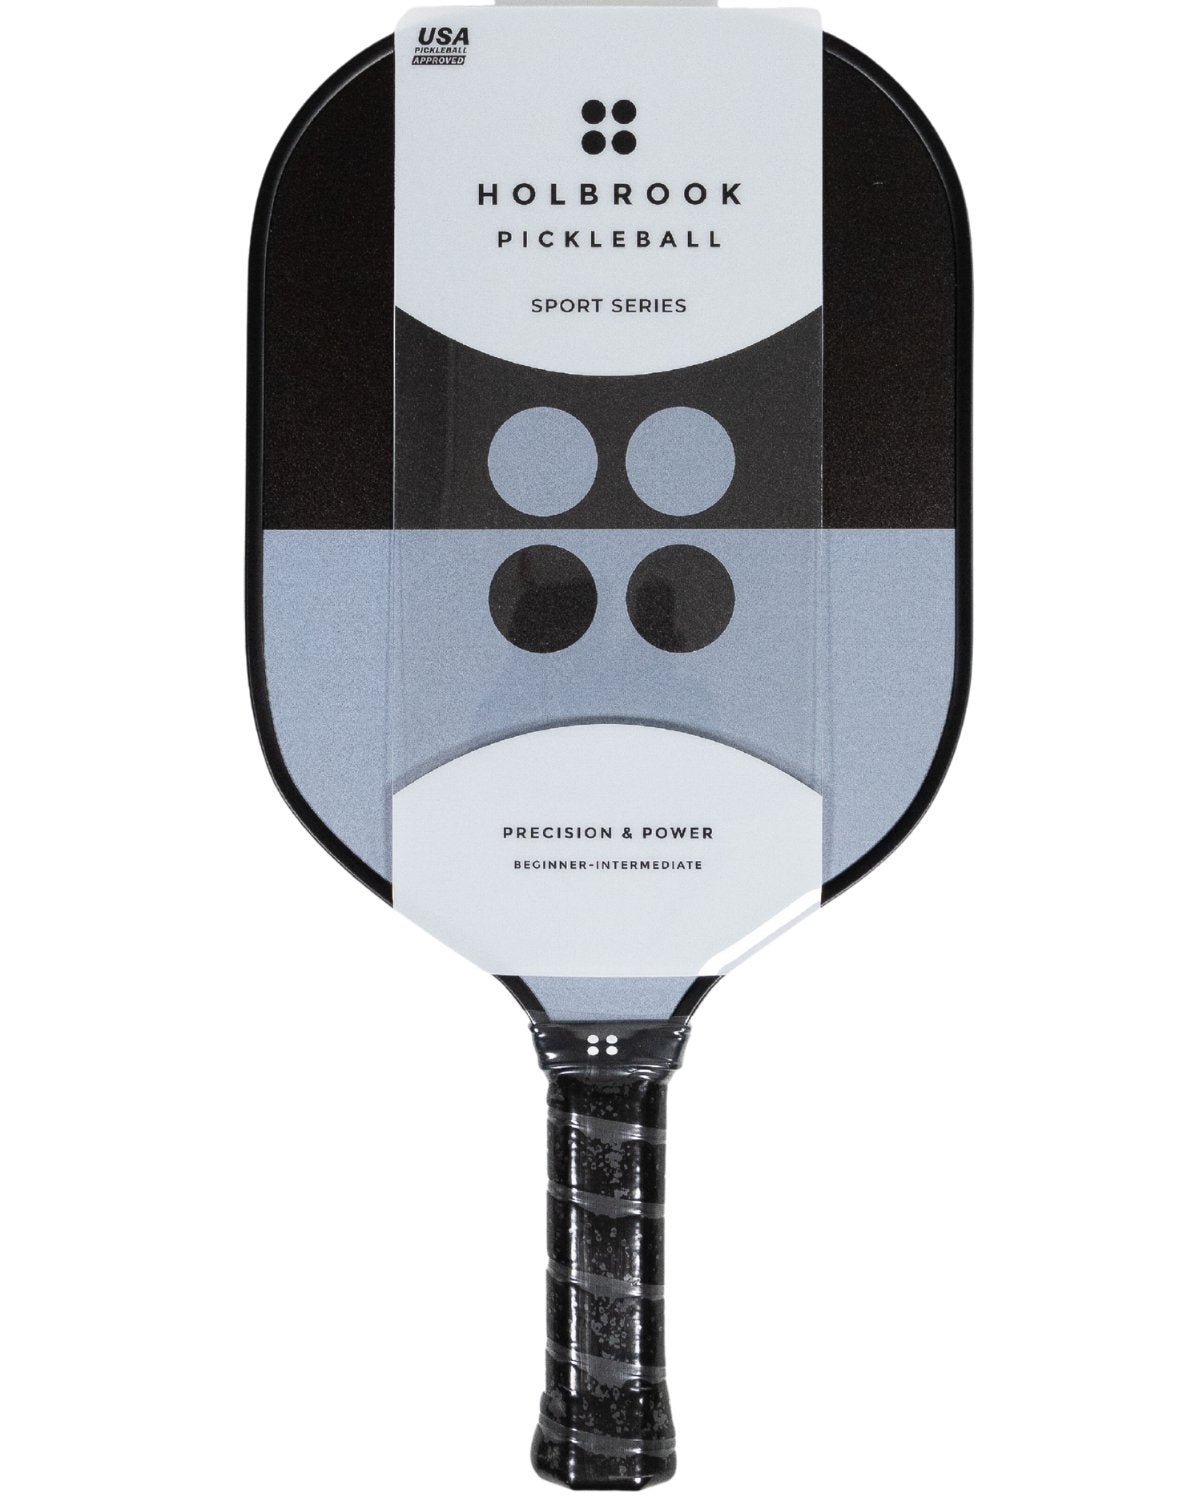 Midnight by Holbrook Pickleball in package